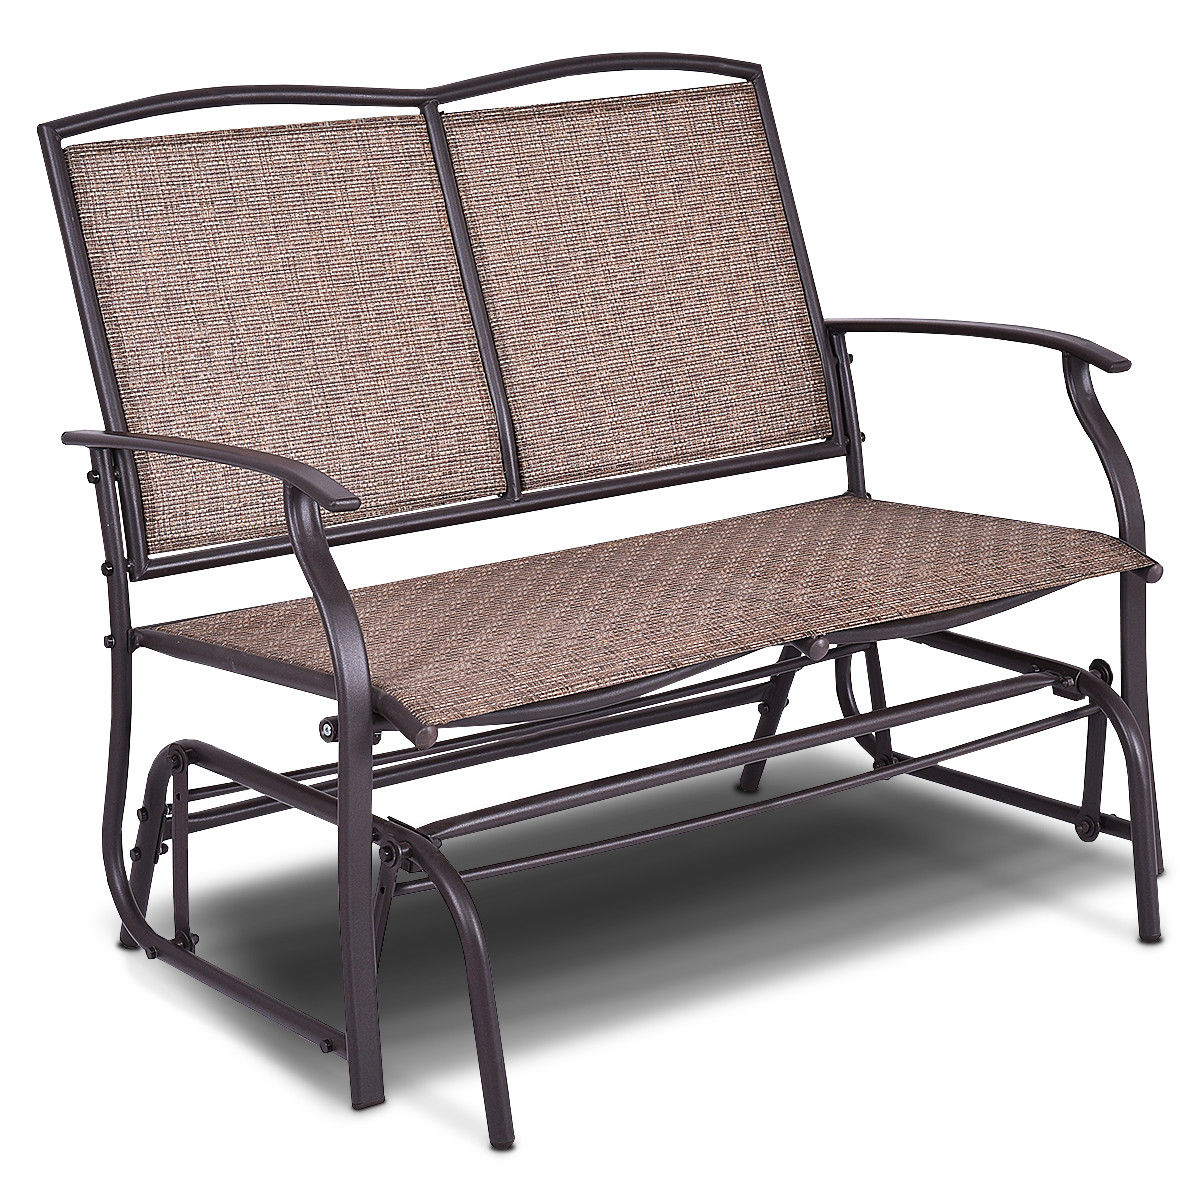 Patio Loveseat Glider Rocking Bench Double Chair With Arm Backyard Outdoor